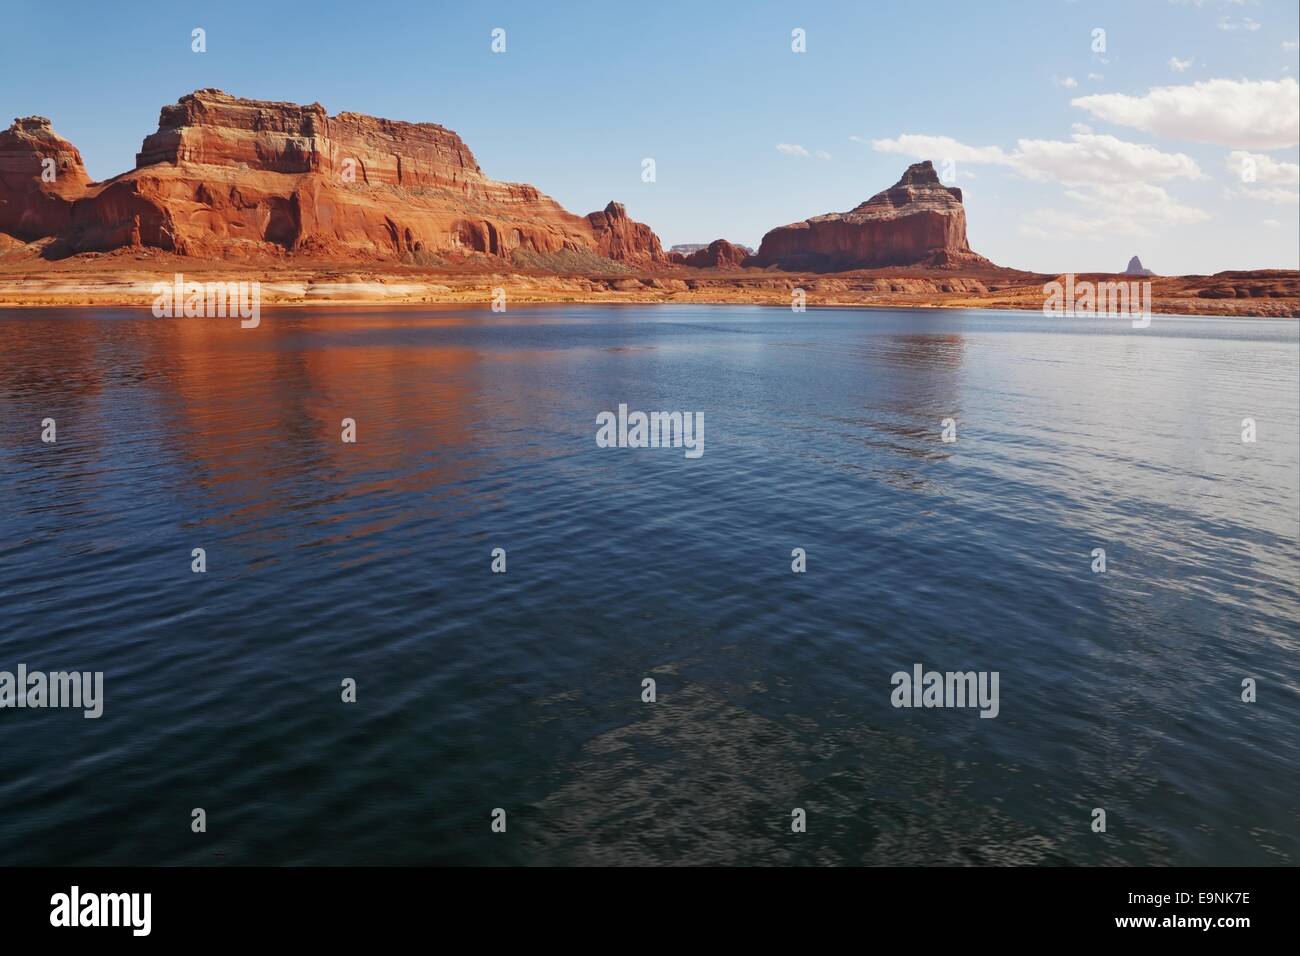 The red cliffs Stock Photo